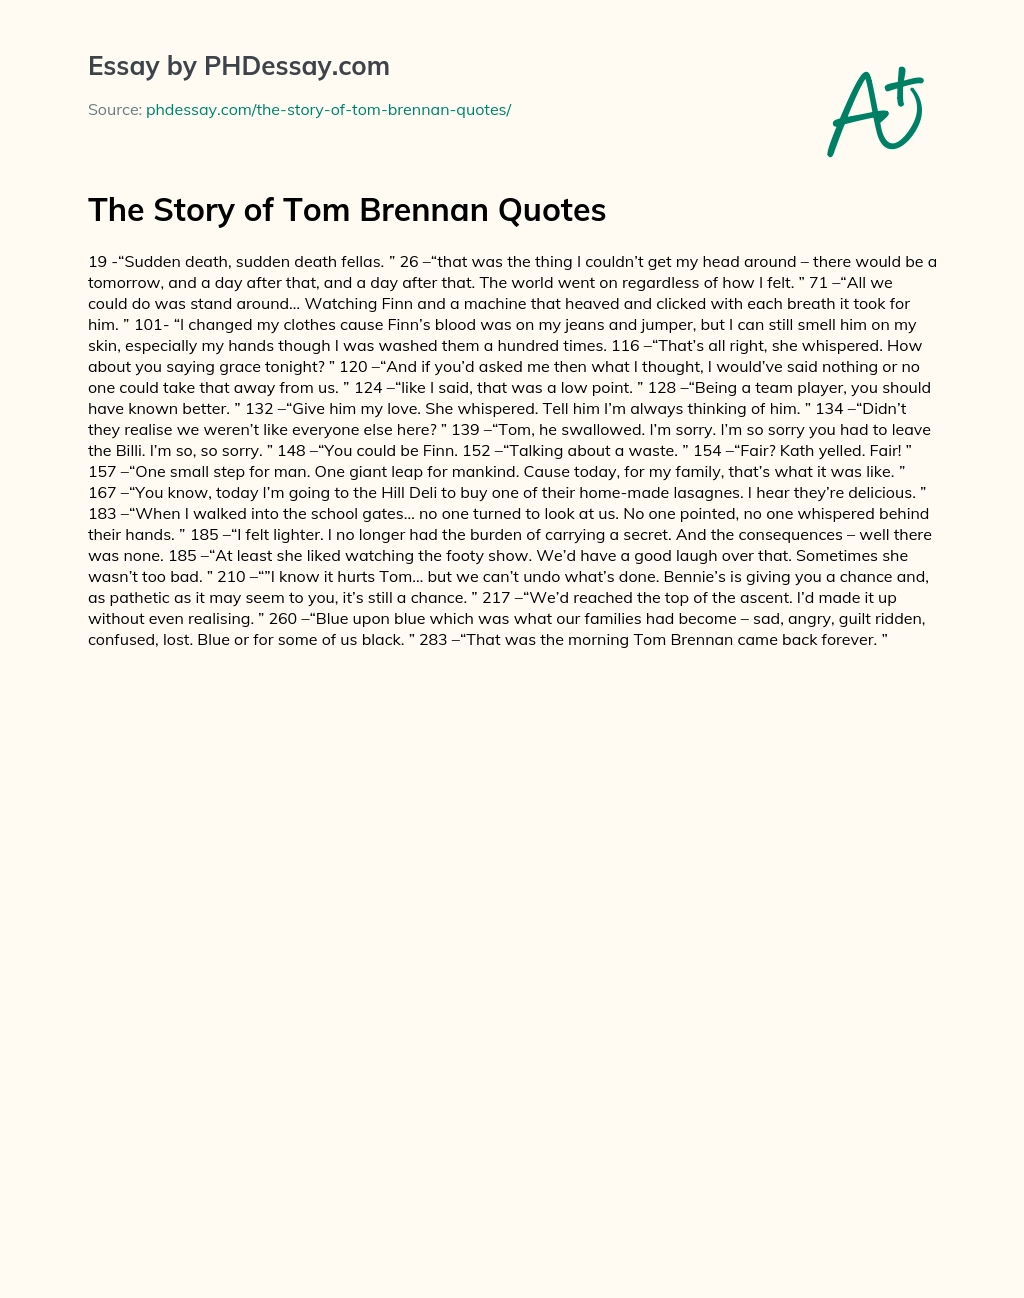 The Story of Tom Brennan Quotes essay